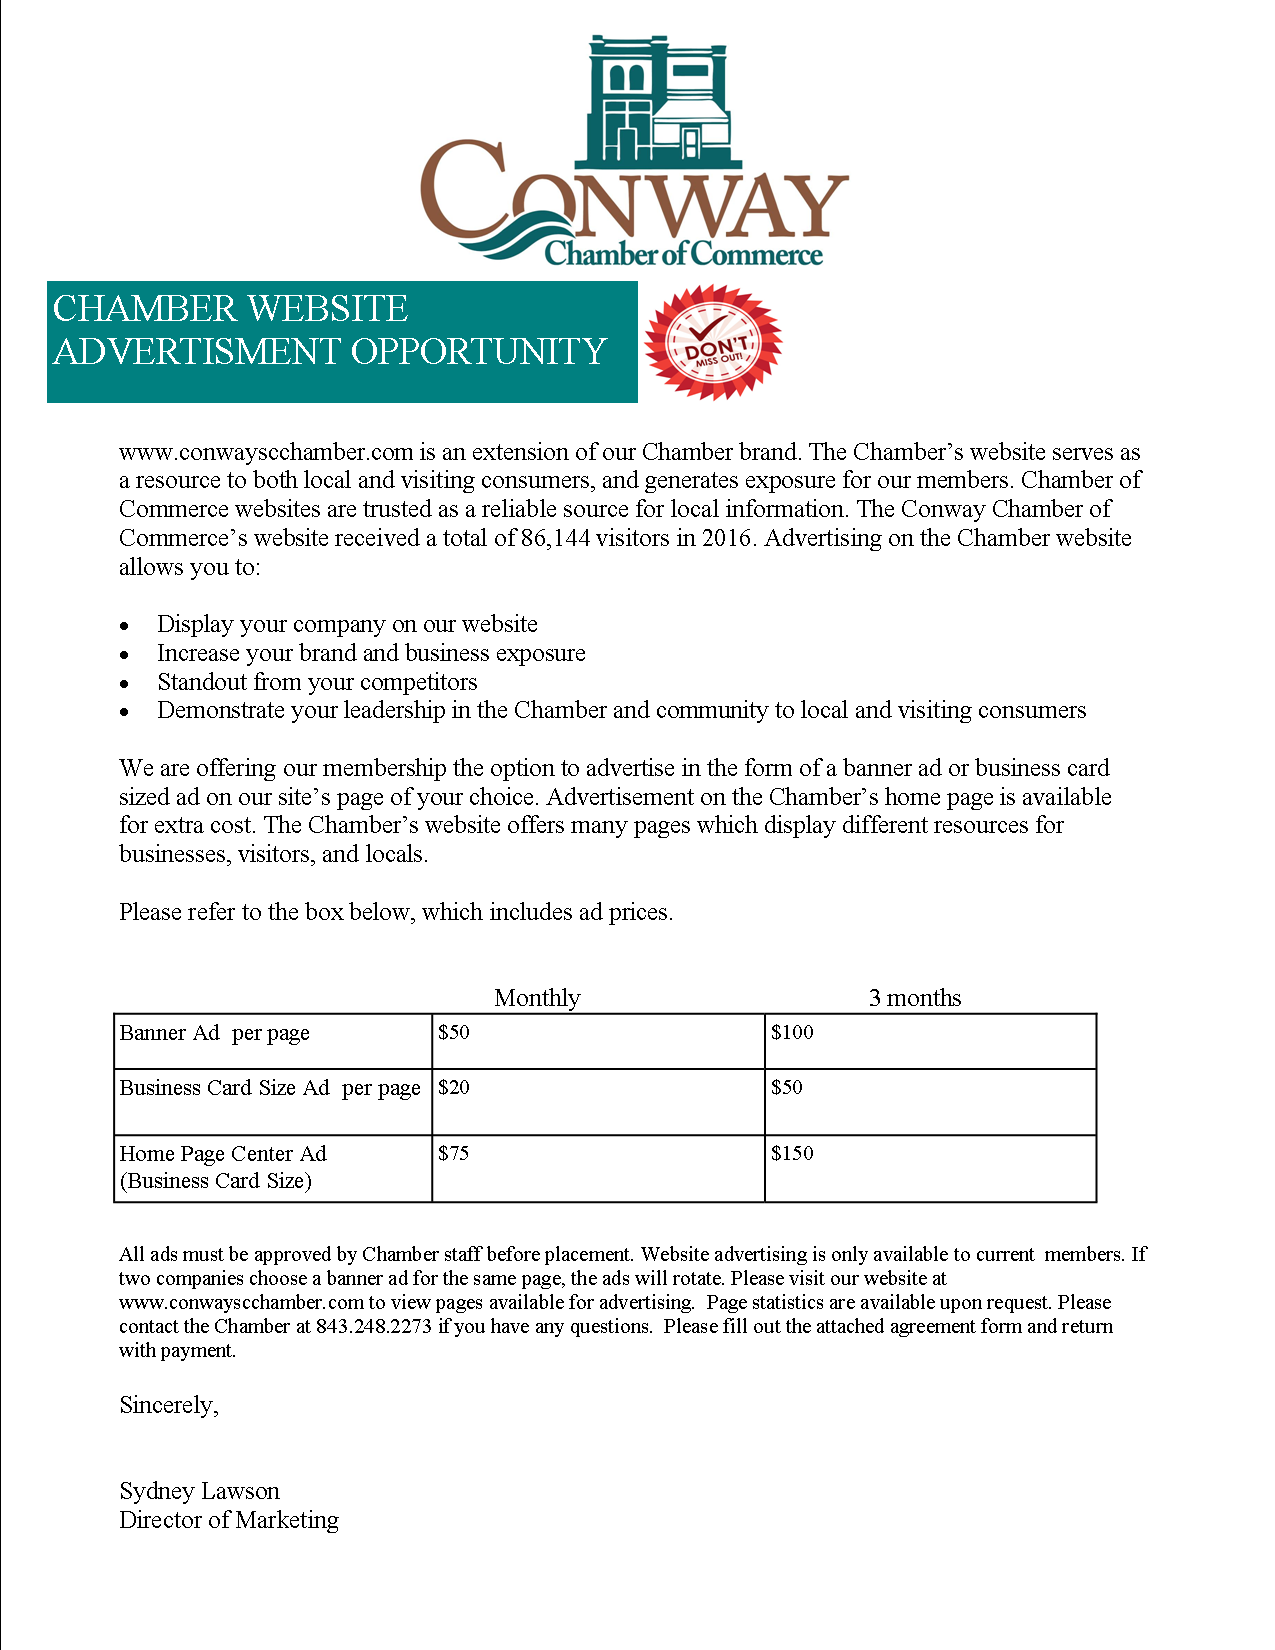 website advertisement letter | Conway Chamber of Commerce